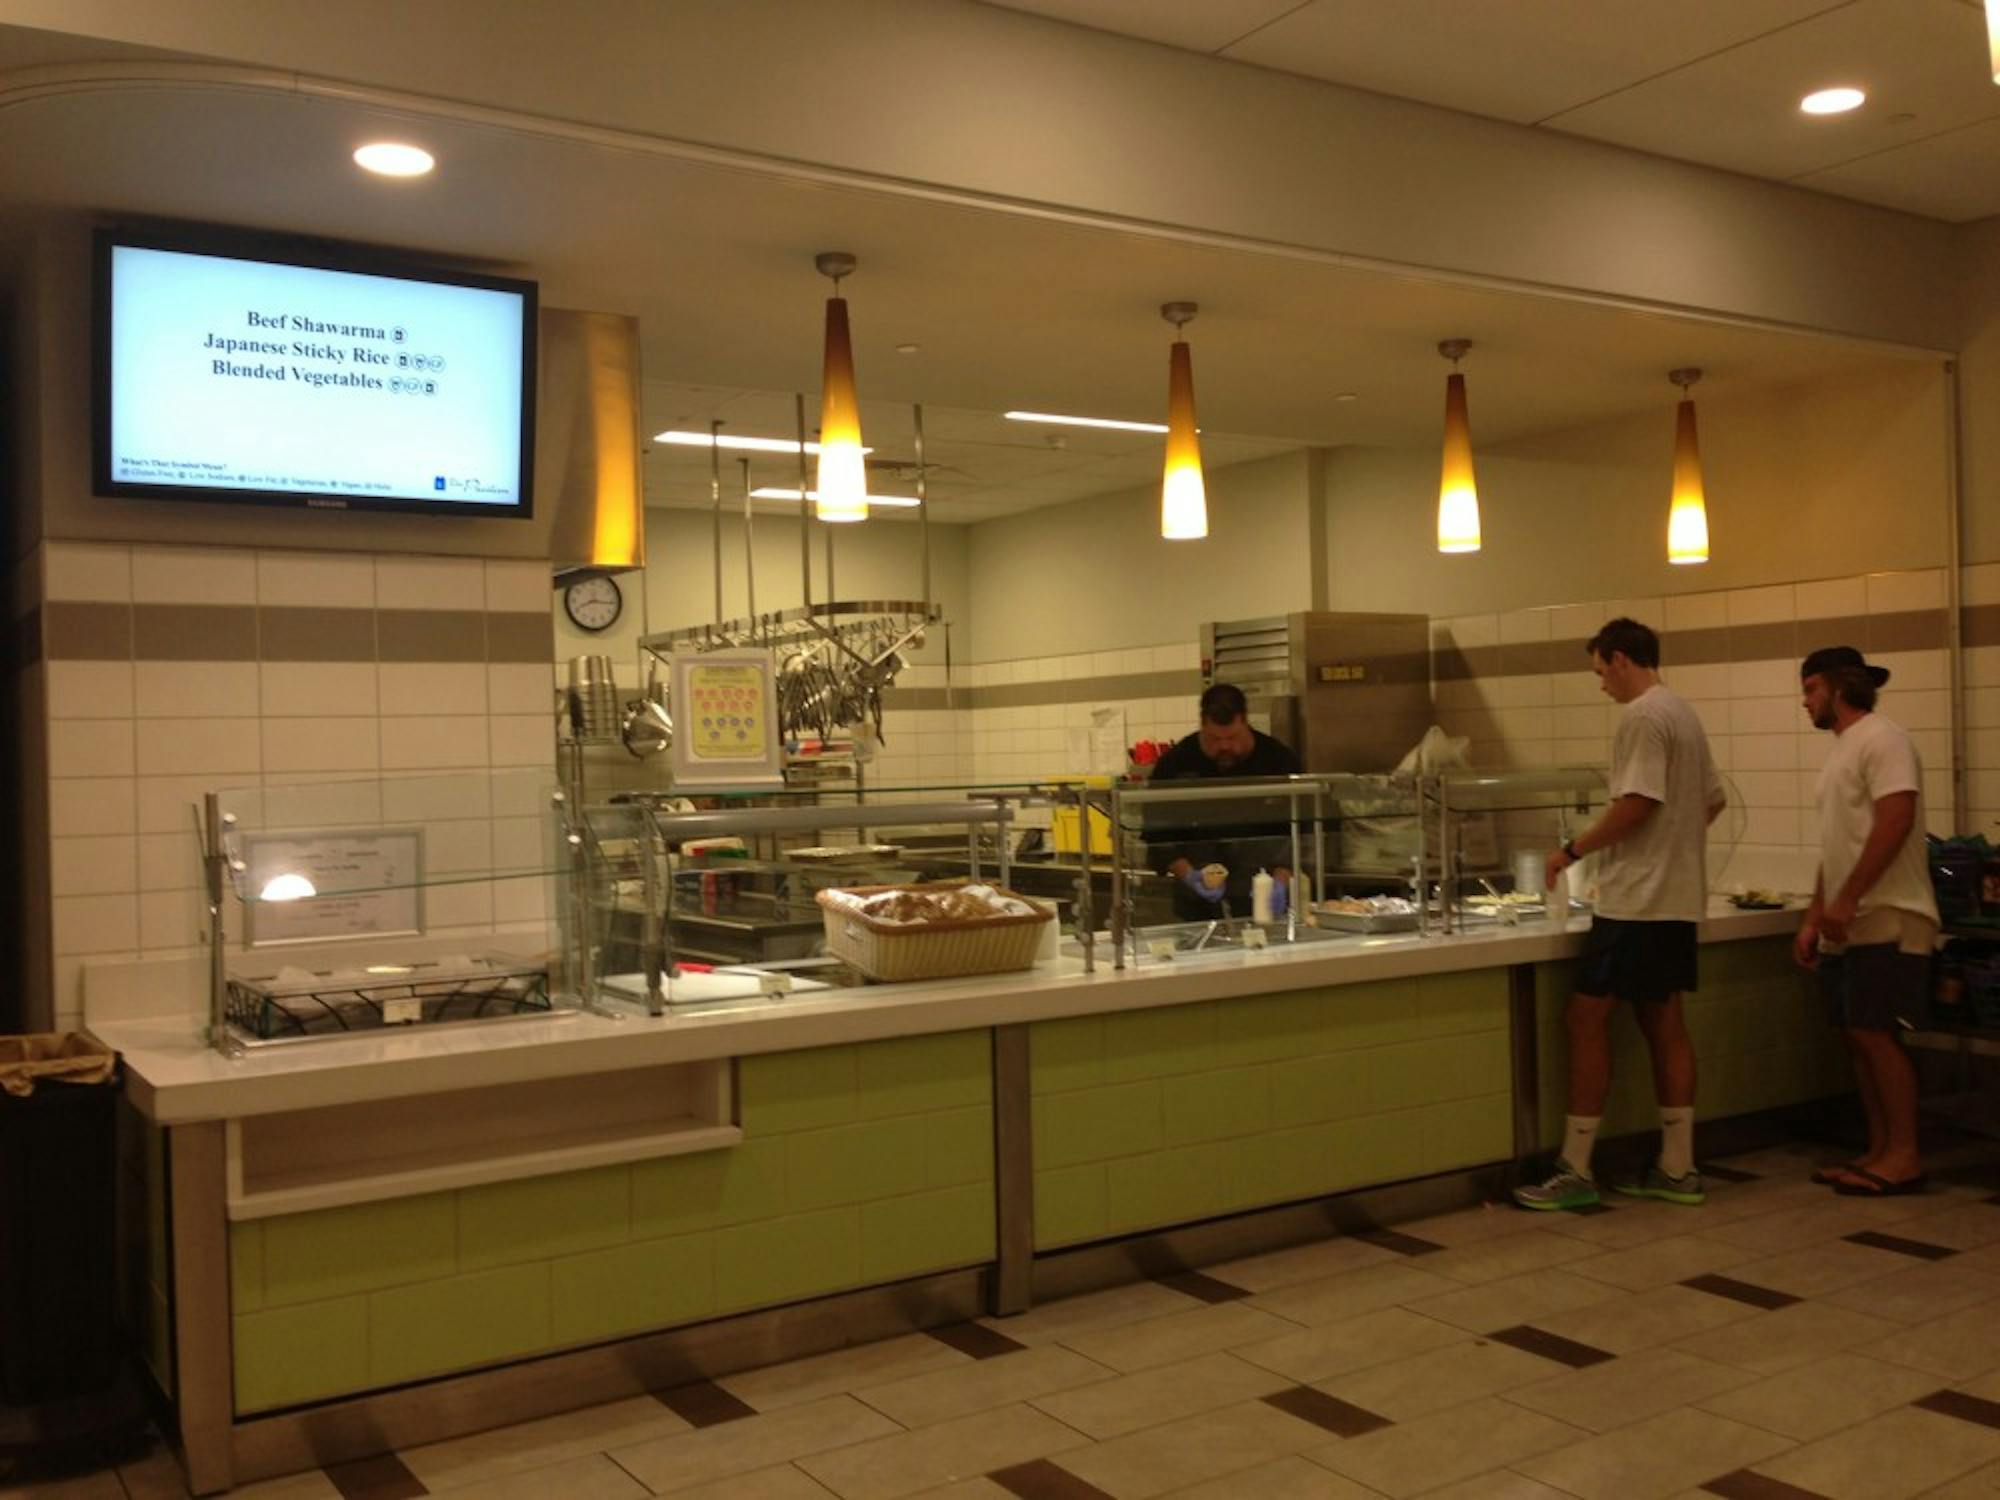 Dartmouth Dining Services currently offers the Tablet-K certified kosher option The Pavillion in the Class of 1953 Commons.